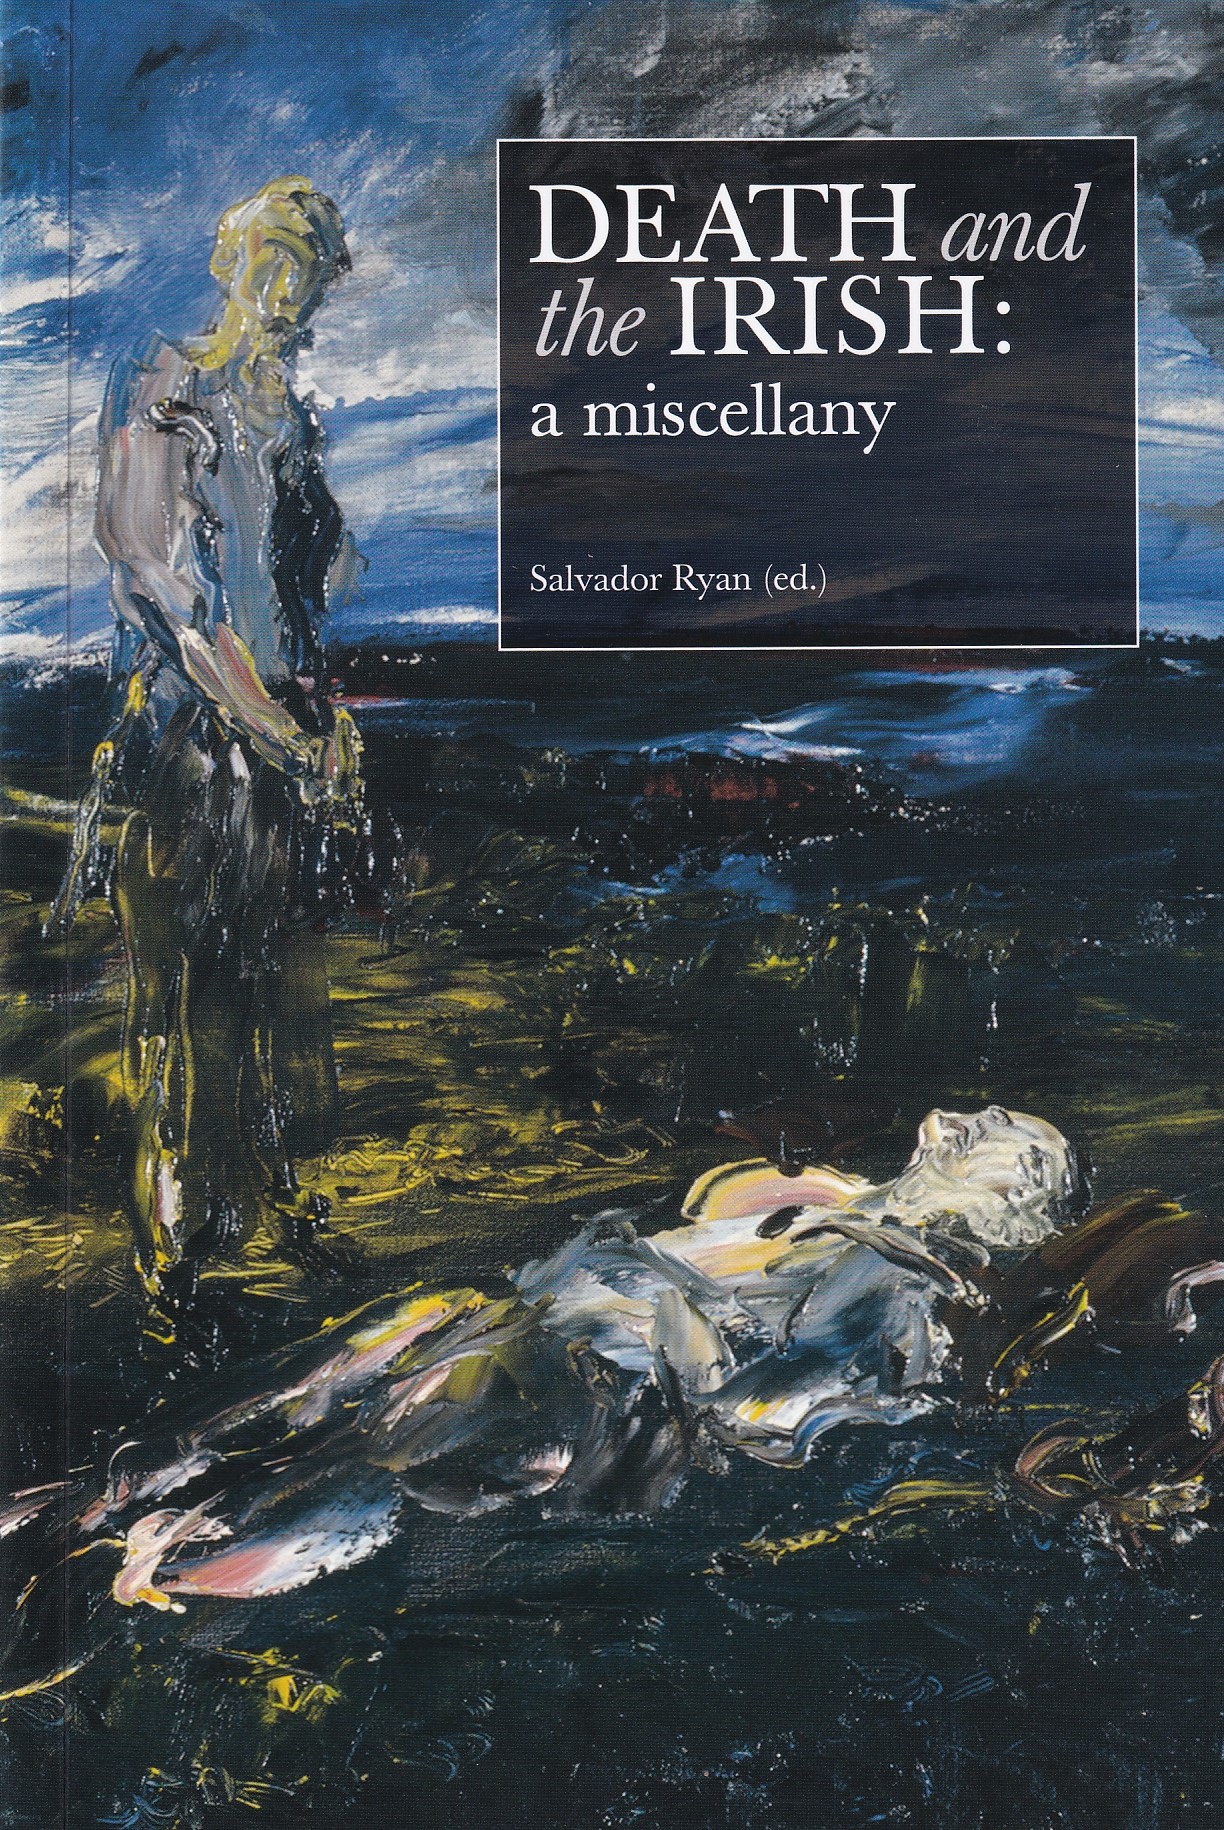 Death and the Irish: A Miscellany by Salvador Ryan (ed.)